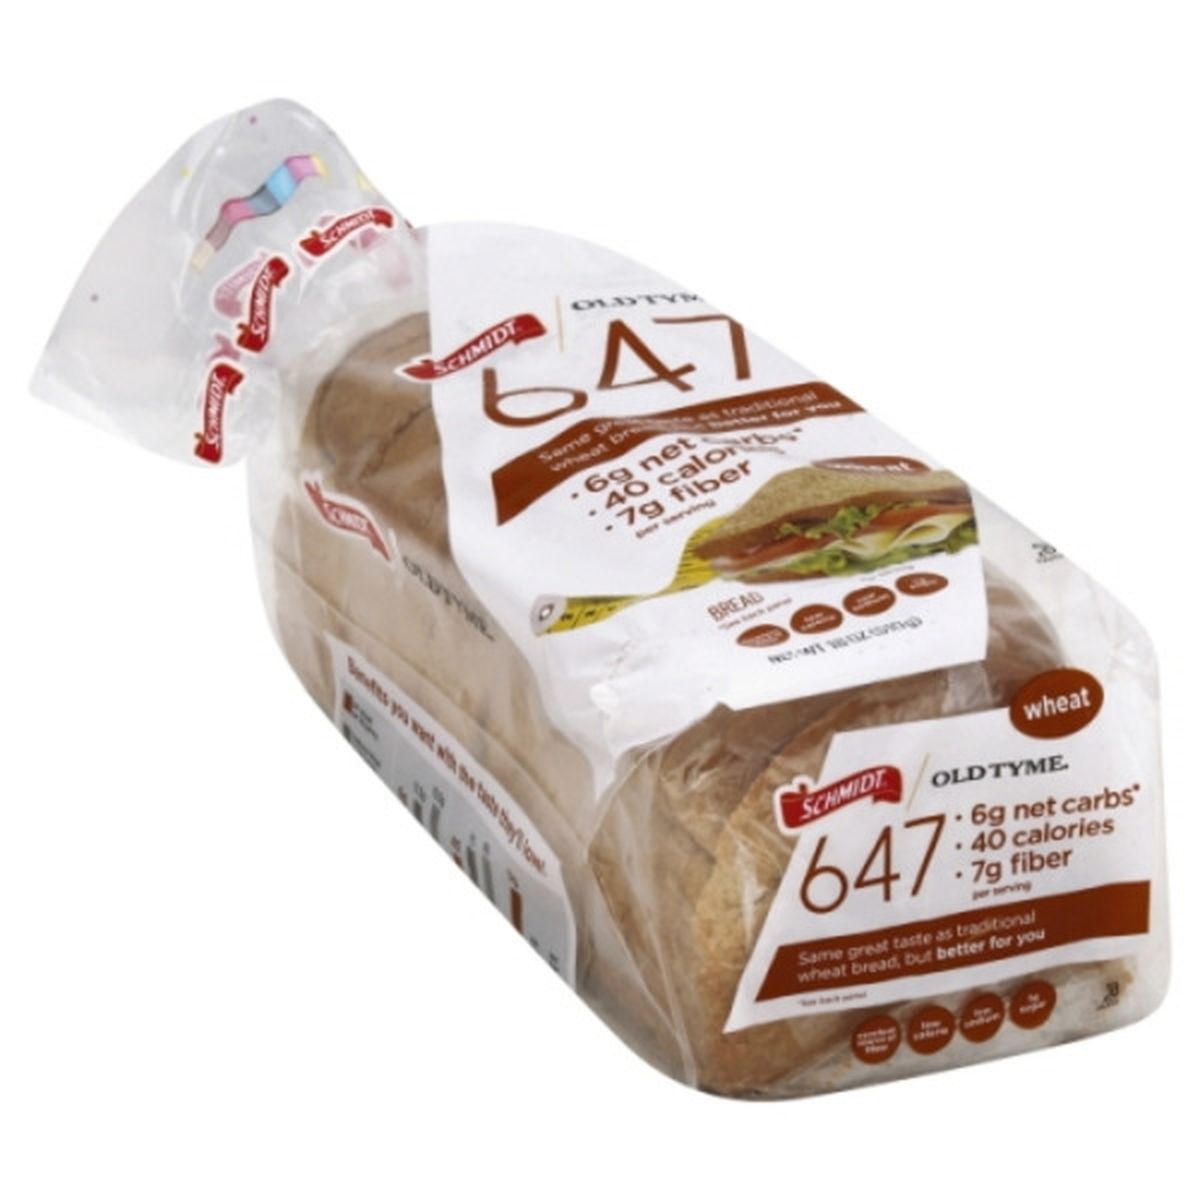 Calories in Old Tyme 647 Bread, Wheat